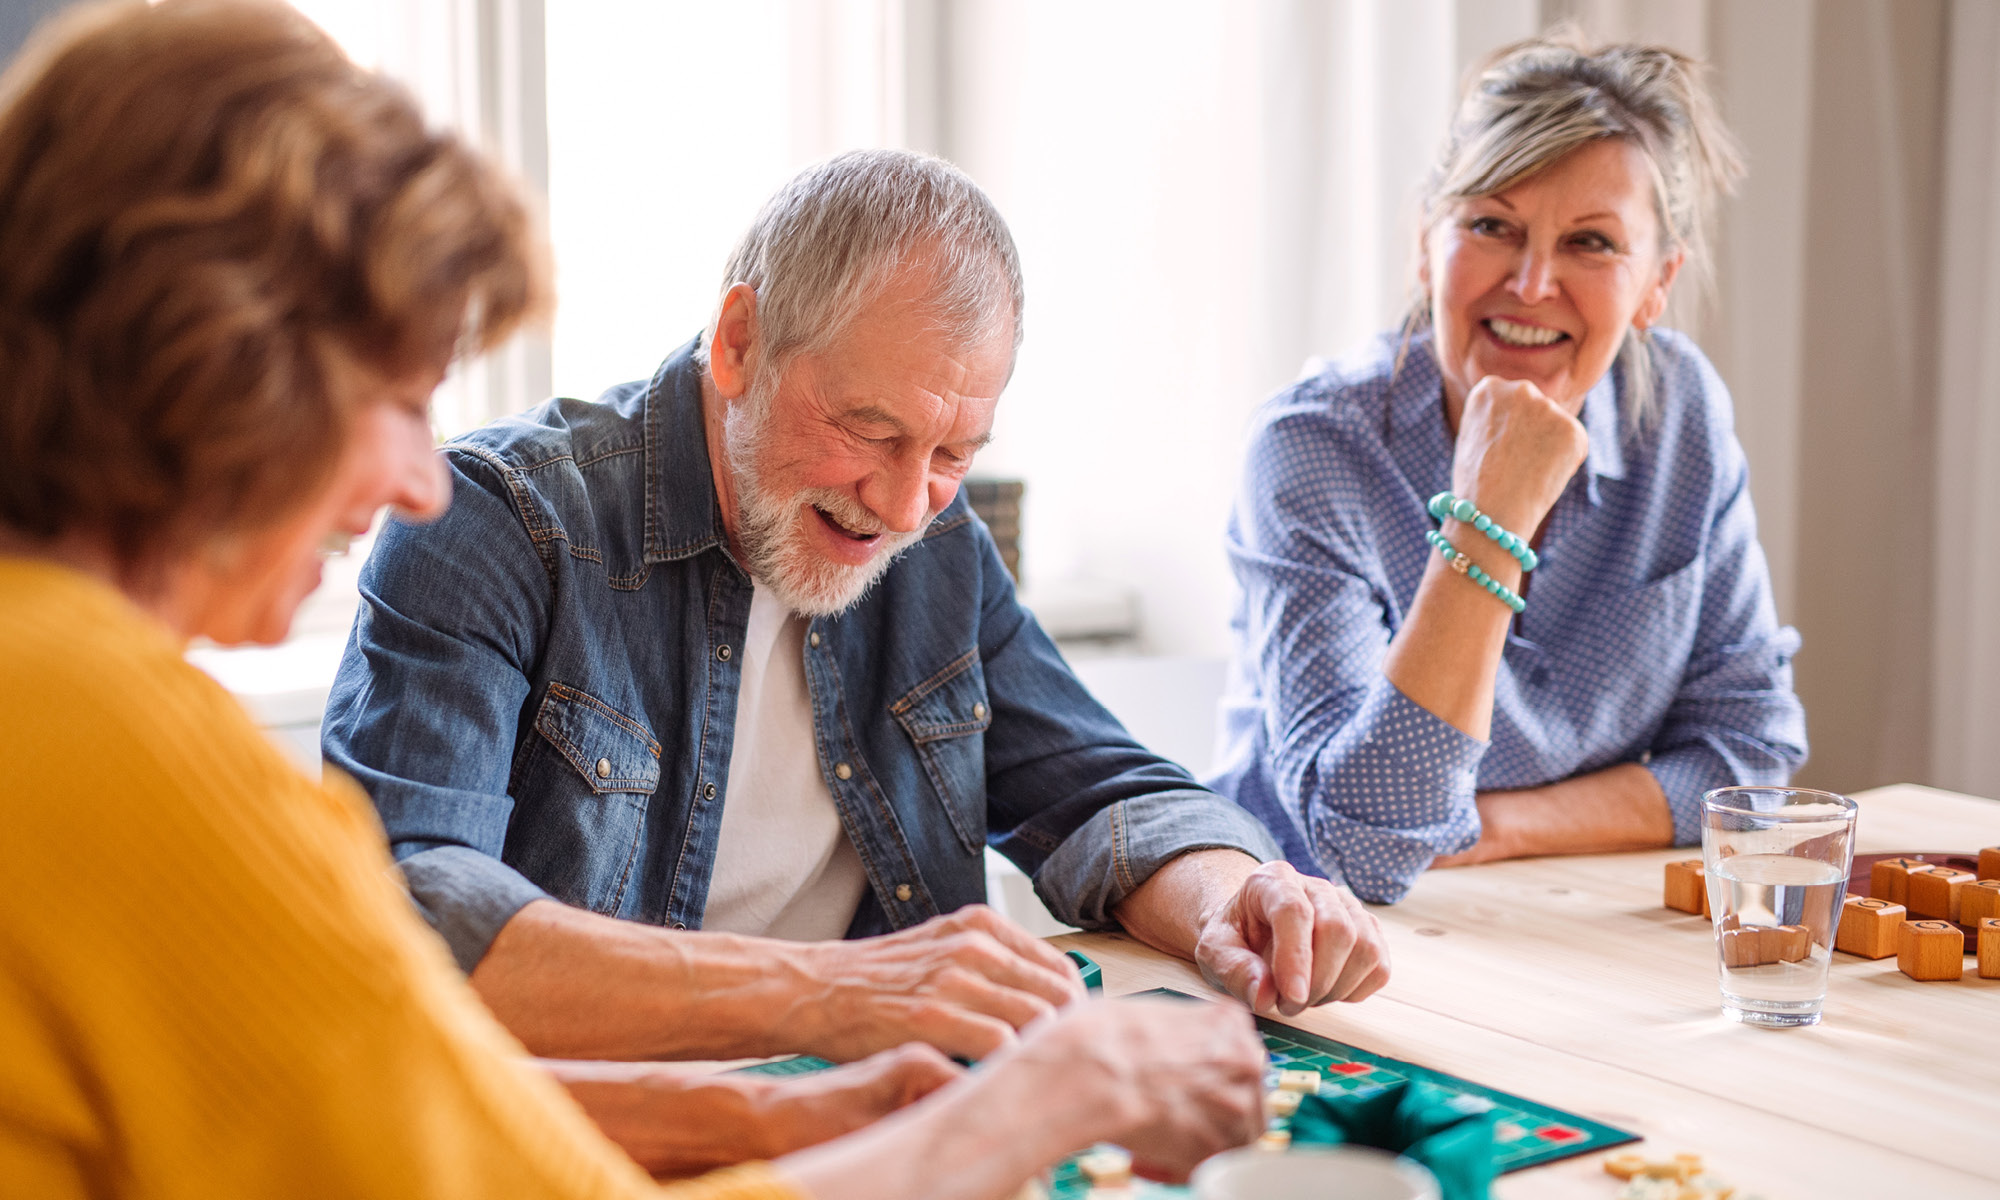 Senior Connection Resources - Pinellas County